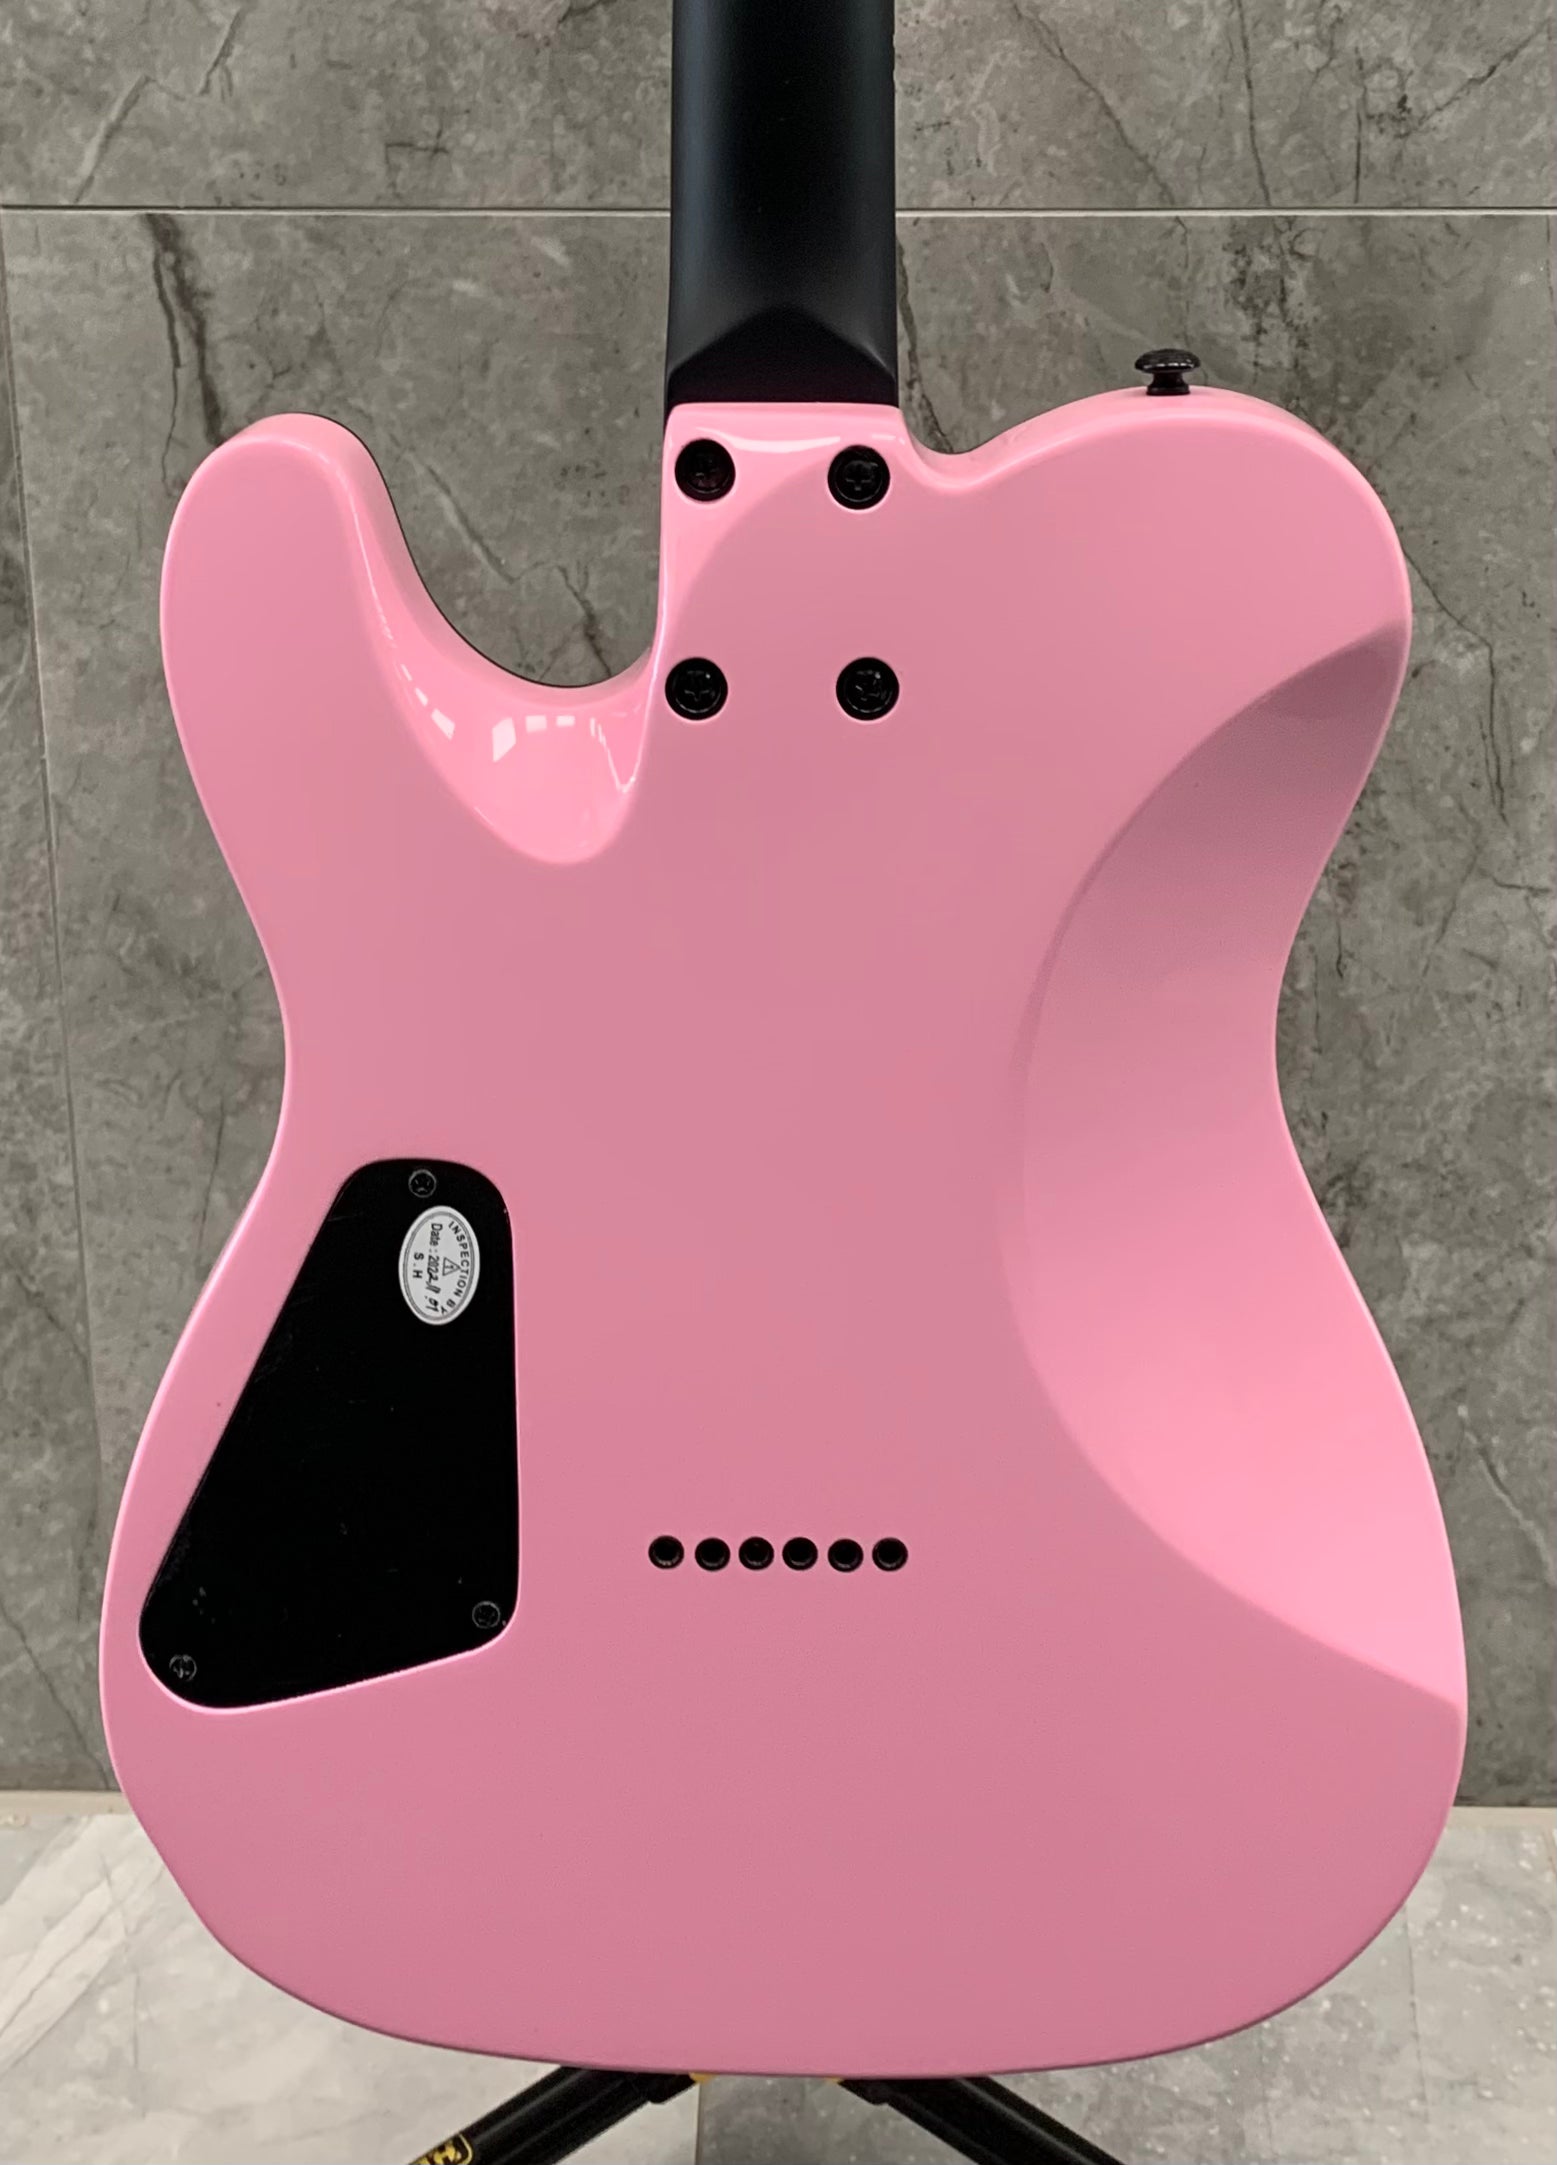 Schecter Machine Gun Kelly Signature PT Electric Guitar Tickets To My Downfall Pink 85-SHC SERIAL NUMBER IW22031593 - 8.0 LBS USED SPECIAL